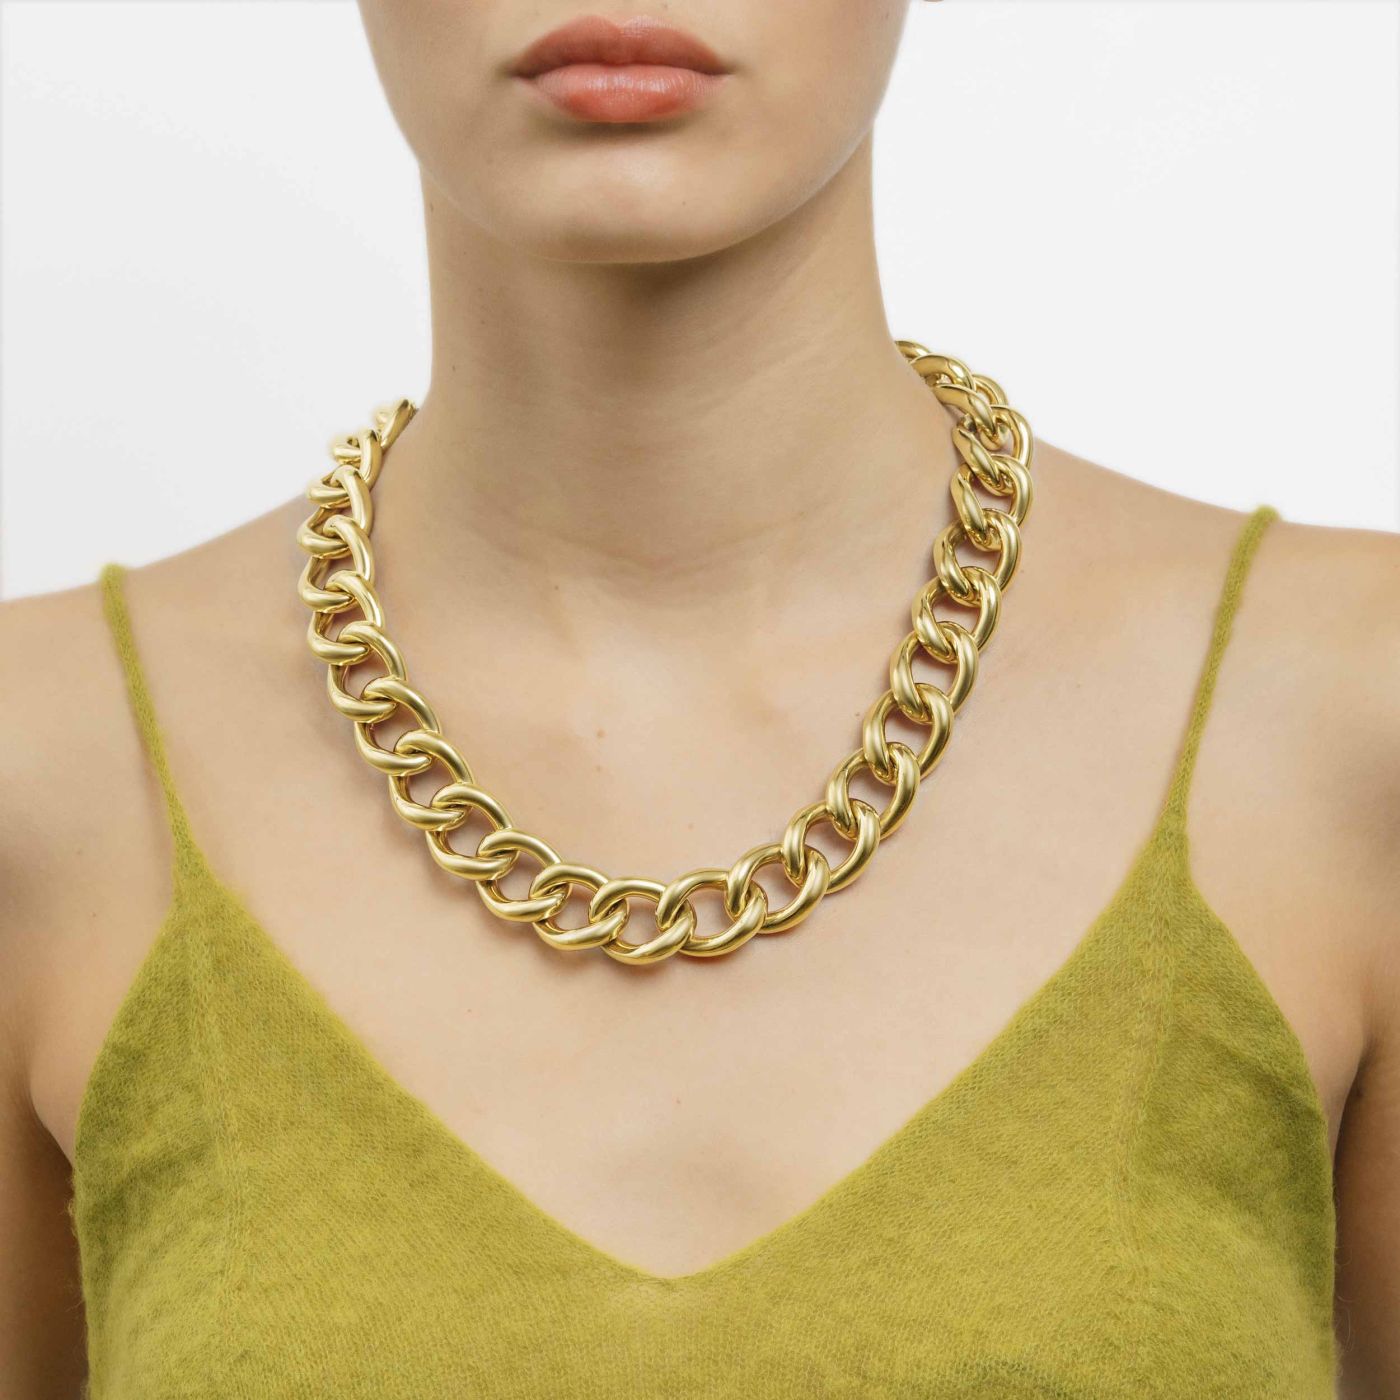 Yellow gold link necklace